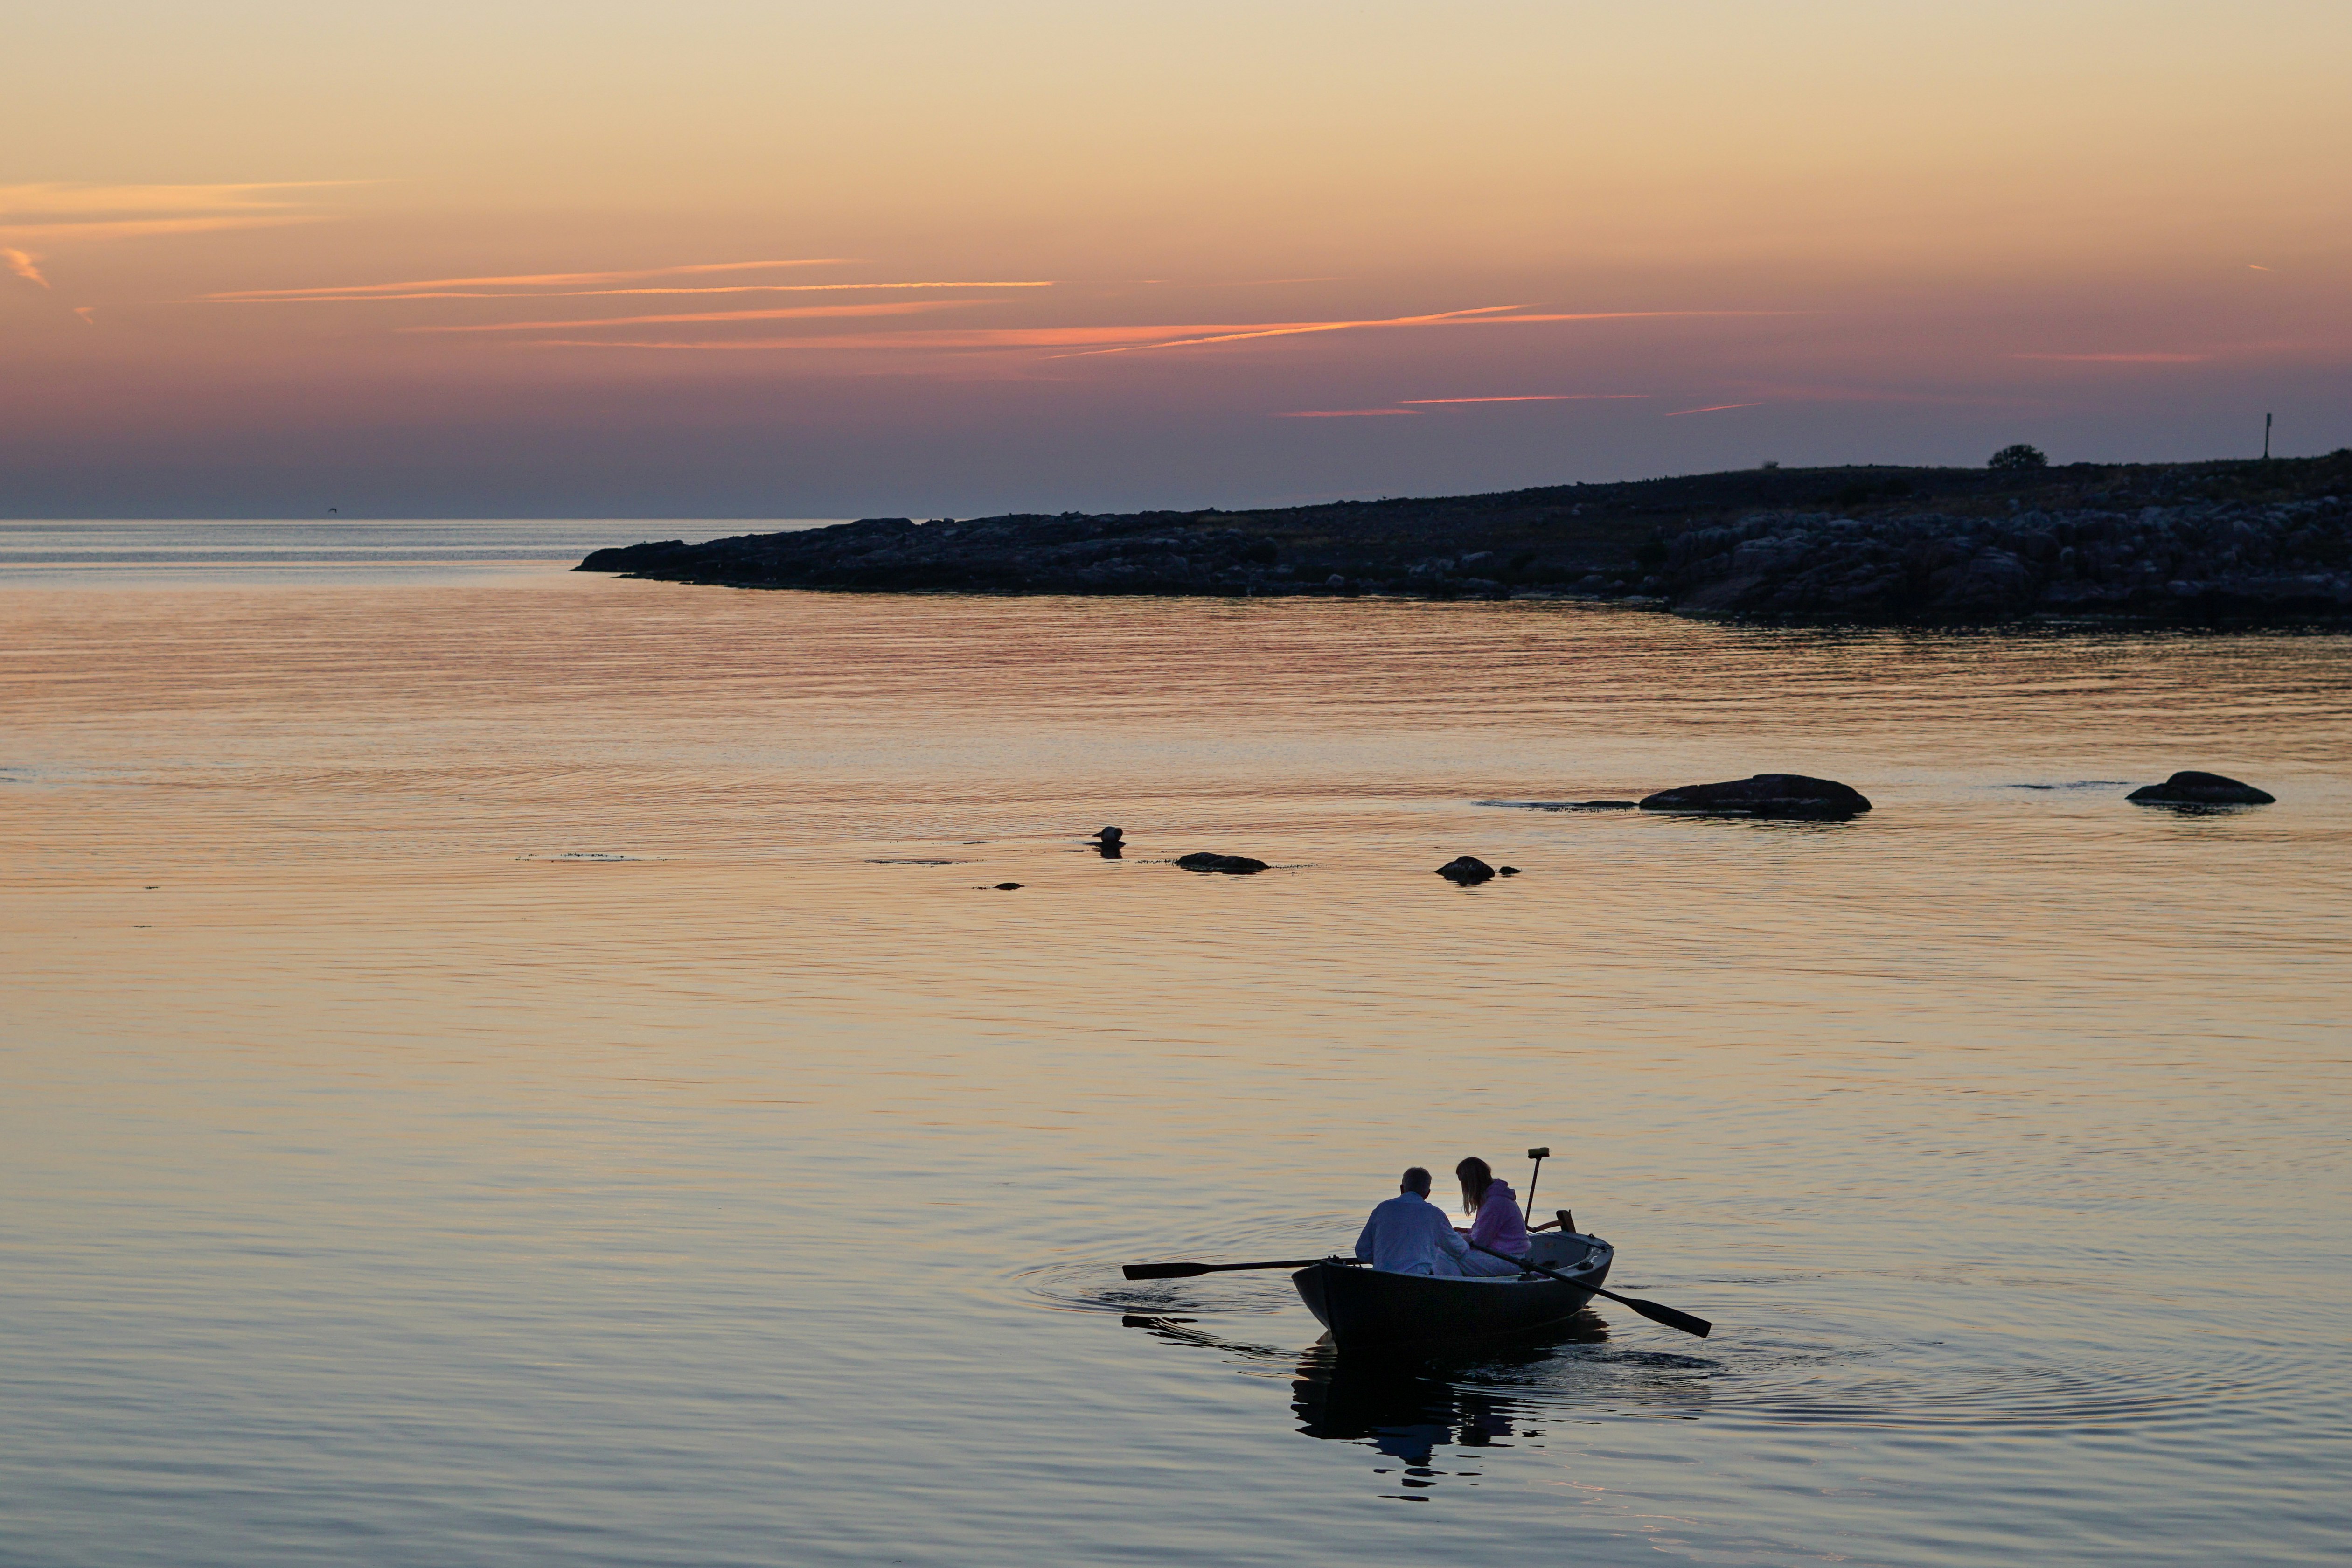 silhouette of 2 people riding on boat on sea during sunset